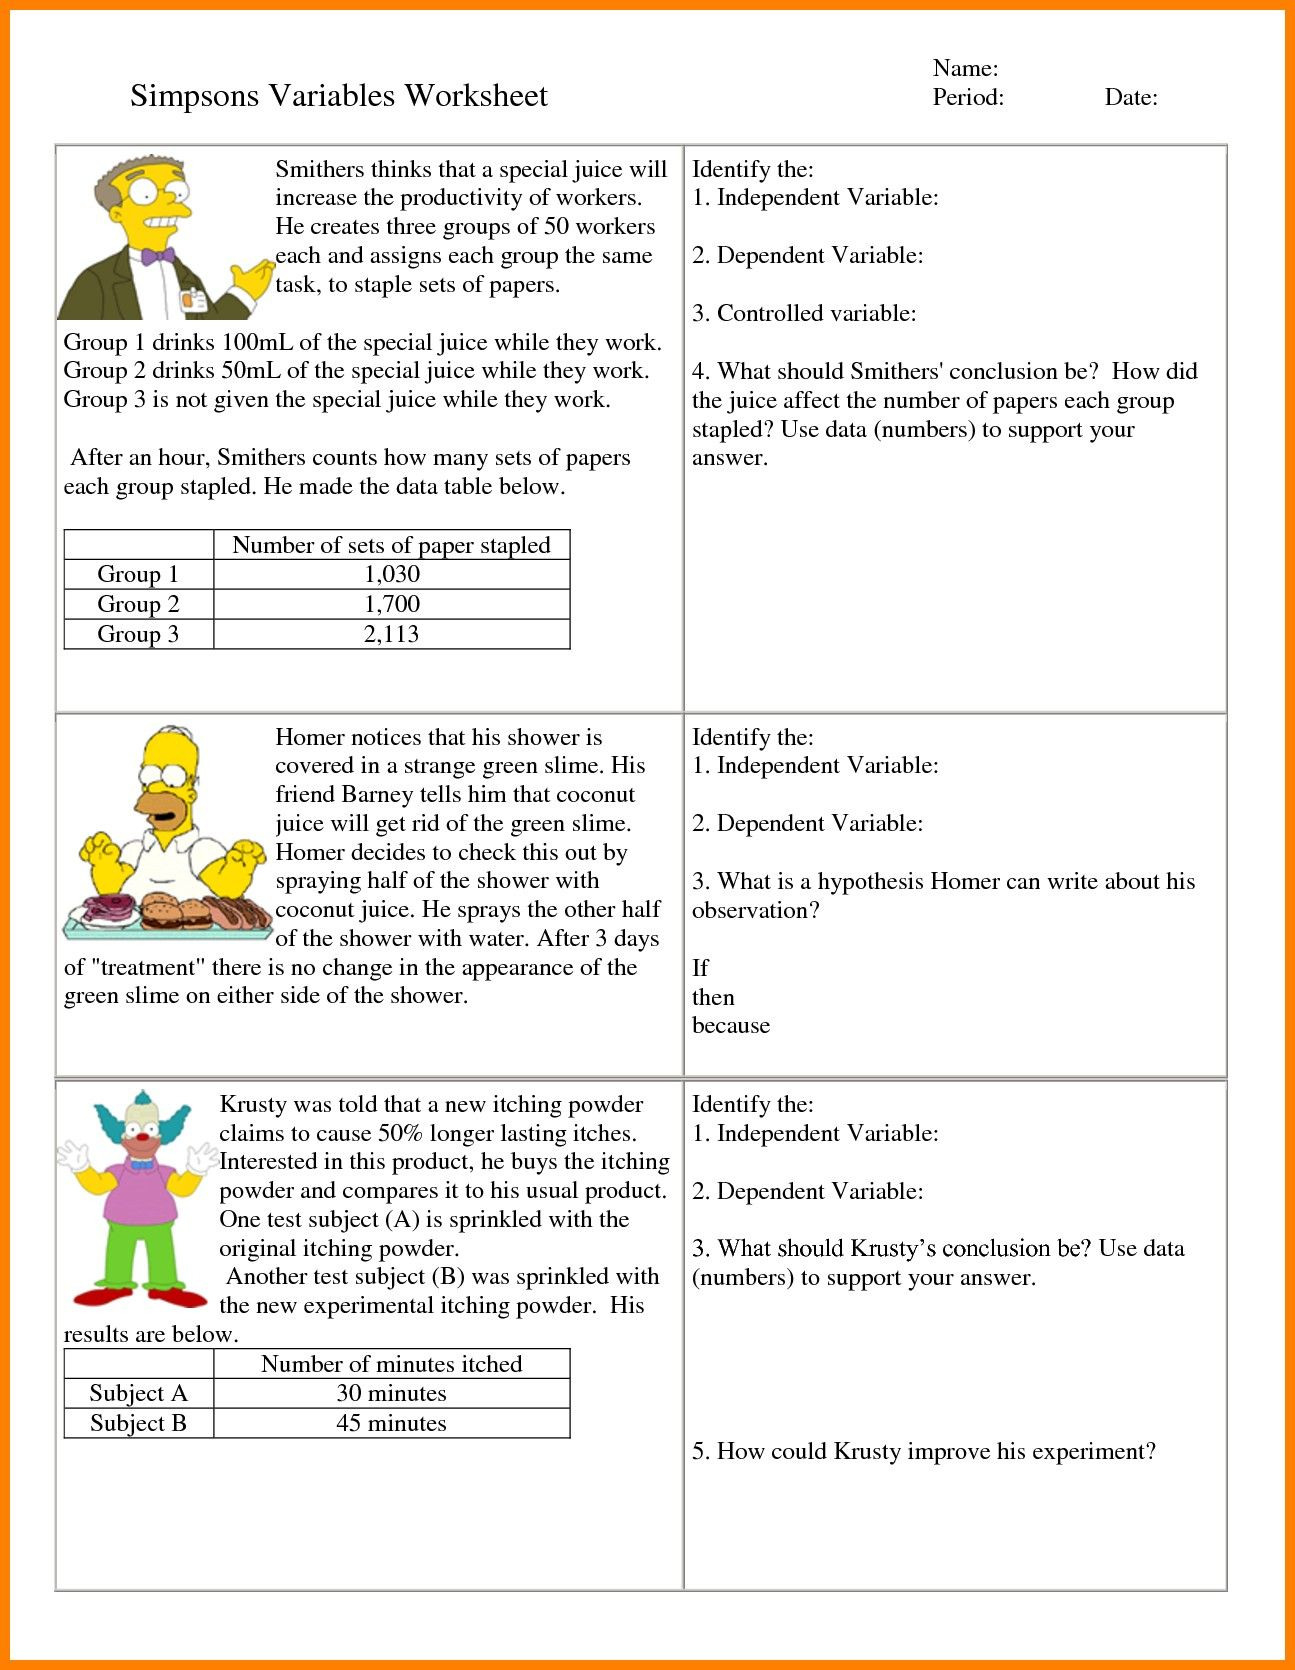 6th-grade-hypothesis-worksheet-refrence-7-independent-and-db-excel